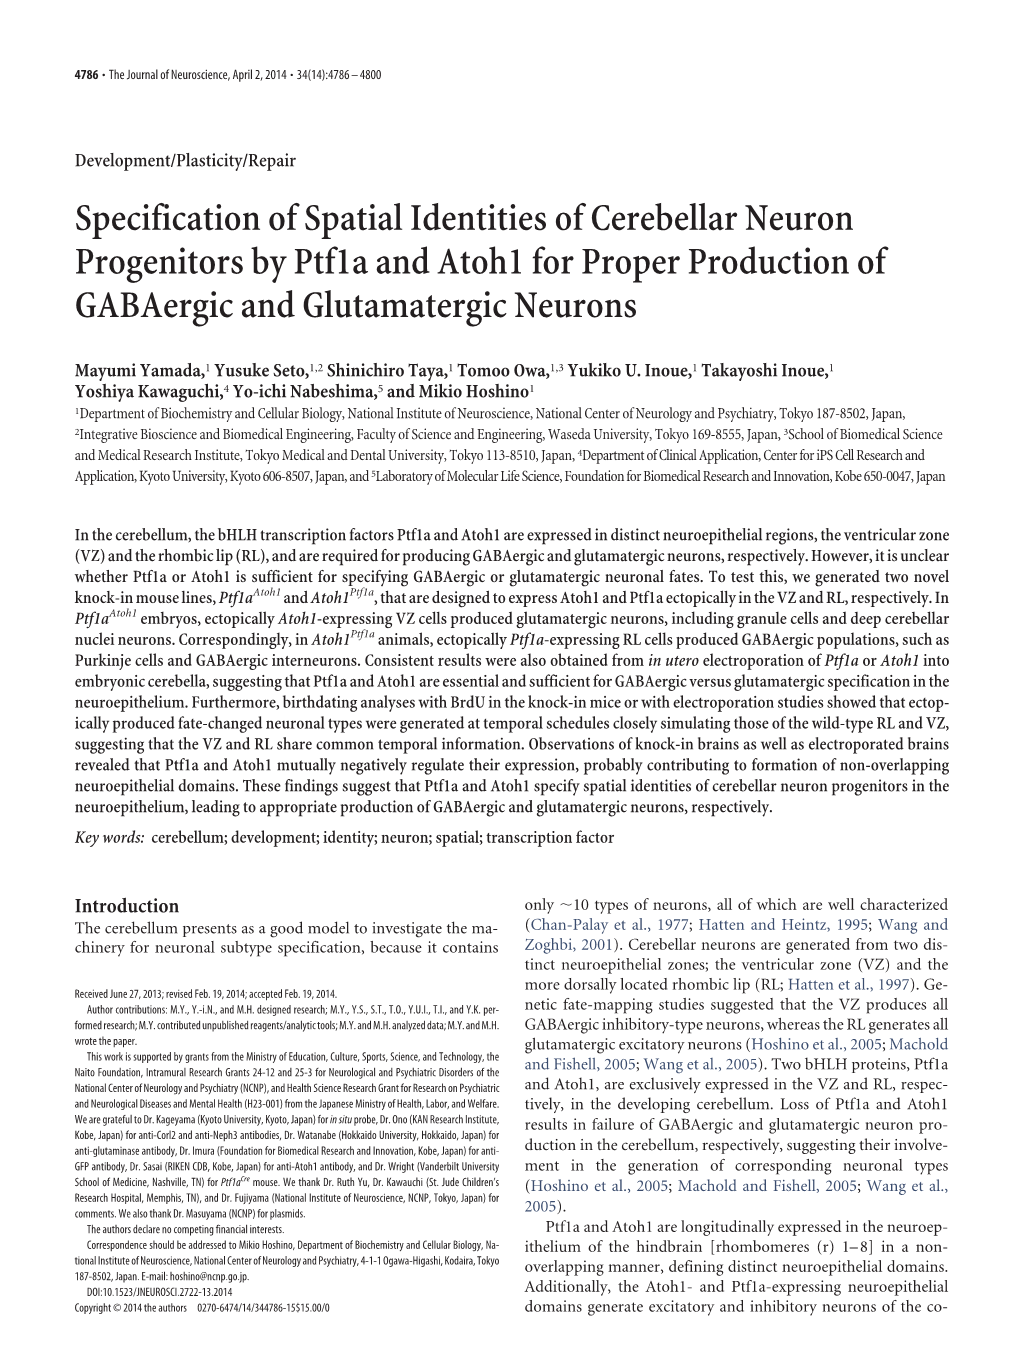 Specification of Spatial Identities of Cerebellar Neuron Progenitors by Ptf1a and Atoh1 for Proper Production of Gabaergic and Glutamatergic Neurons